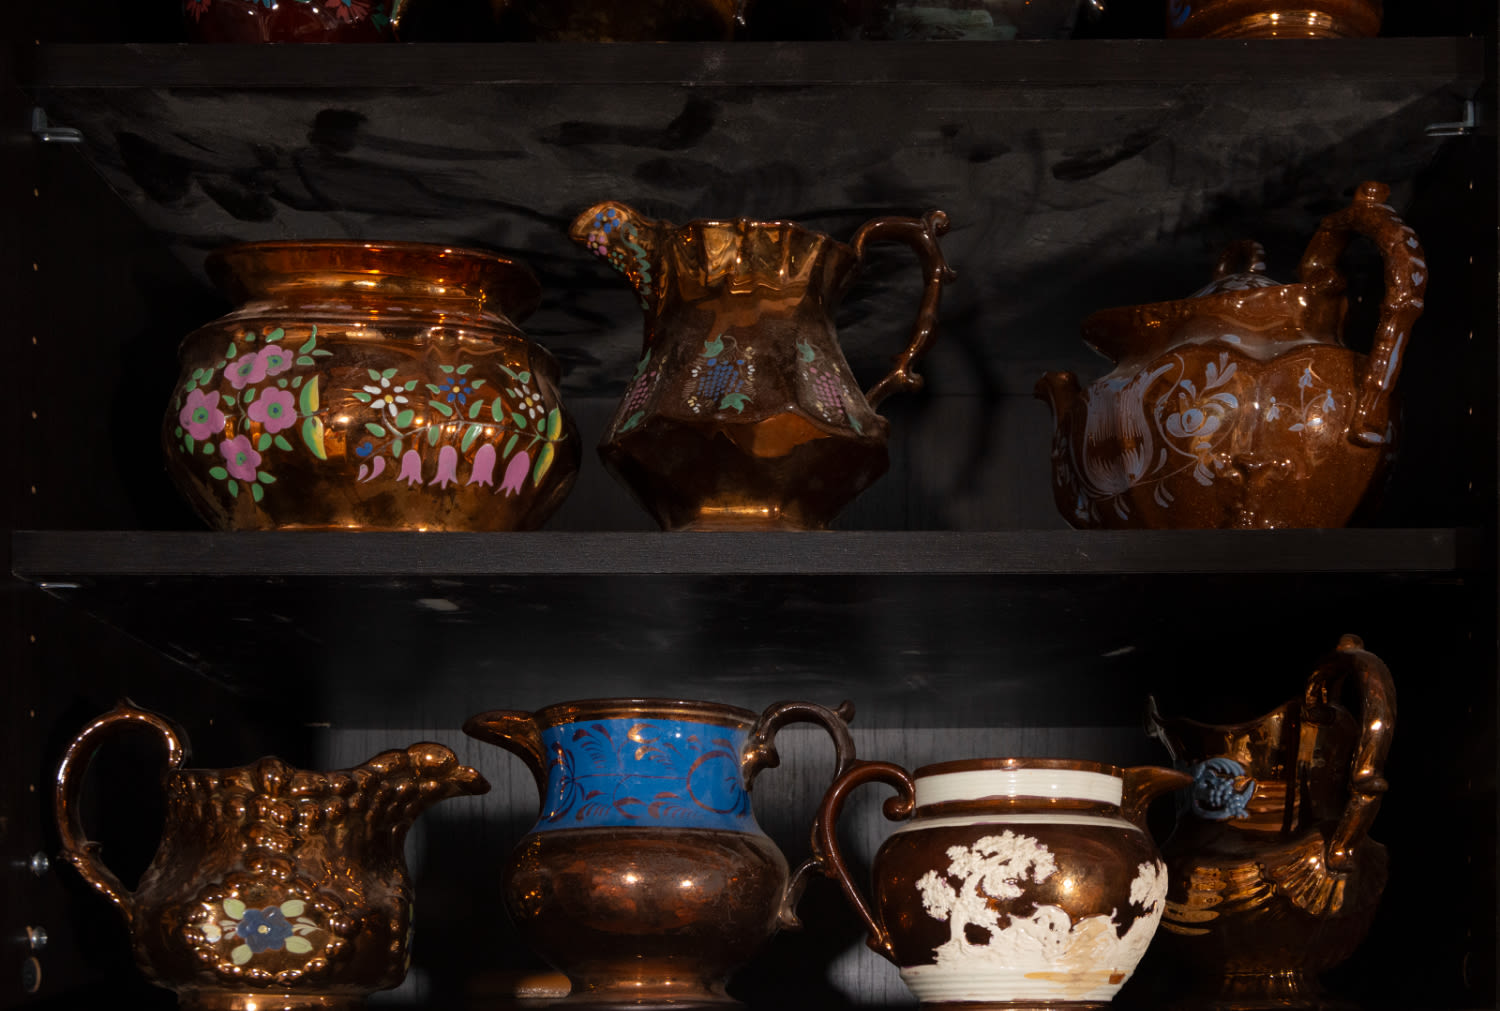 Collection of 78 English Earthenware Jugs from the 19th to 20th centuries - Image 9 of 10